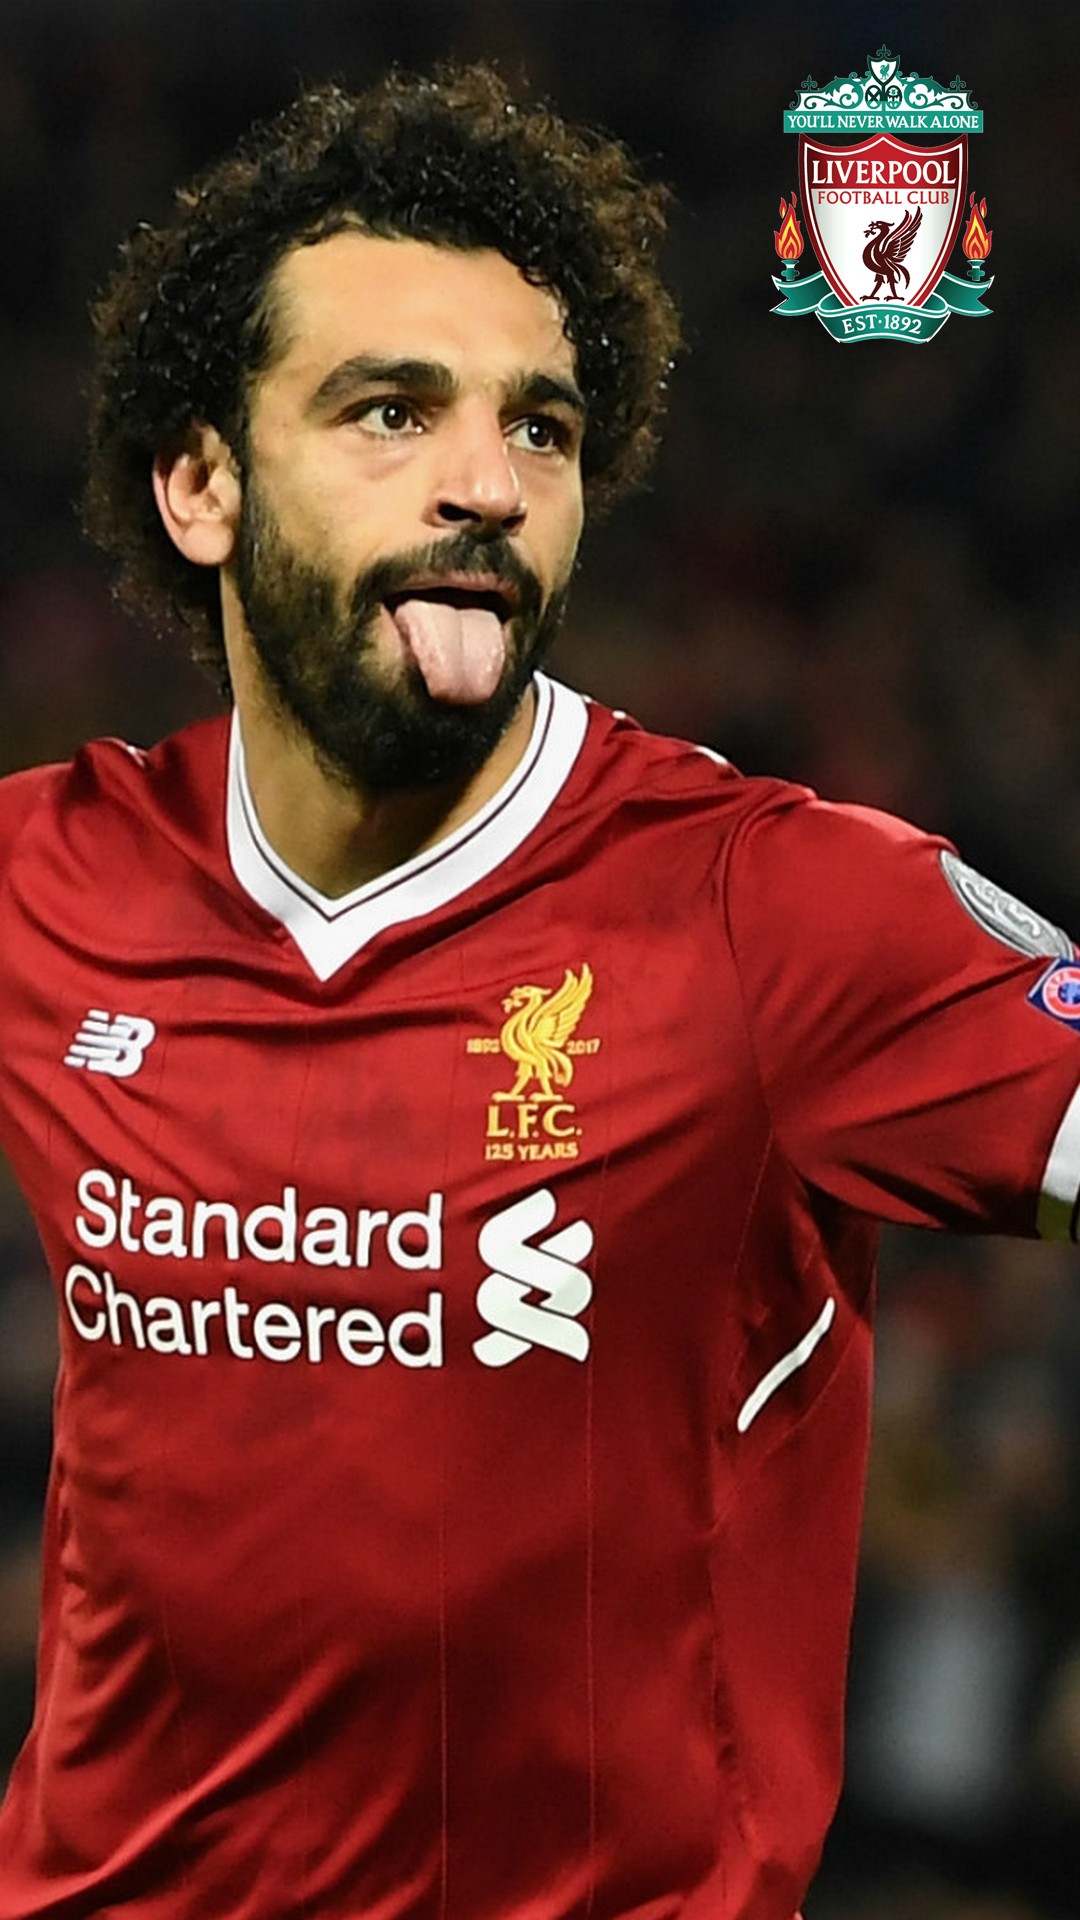 Liverpool Mohamed Salah Wallpaper iPhone with image resolution 1080x1920 pixel. You can make this wallpaper for your iPhone 5, 6, 7, 8, X backgrounds, Mobile Screensaver, or iPad Lock Screen